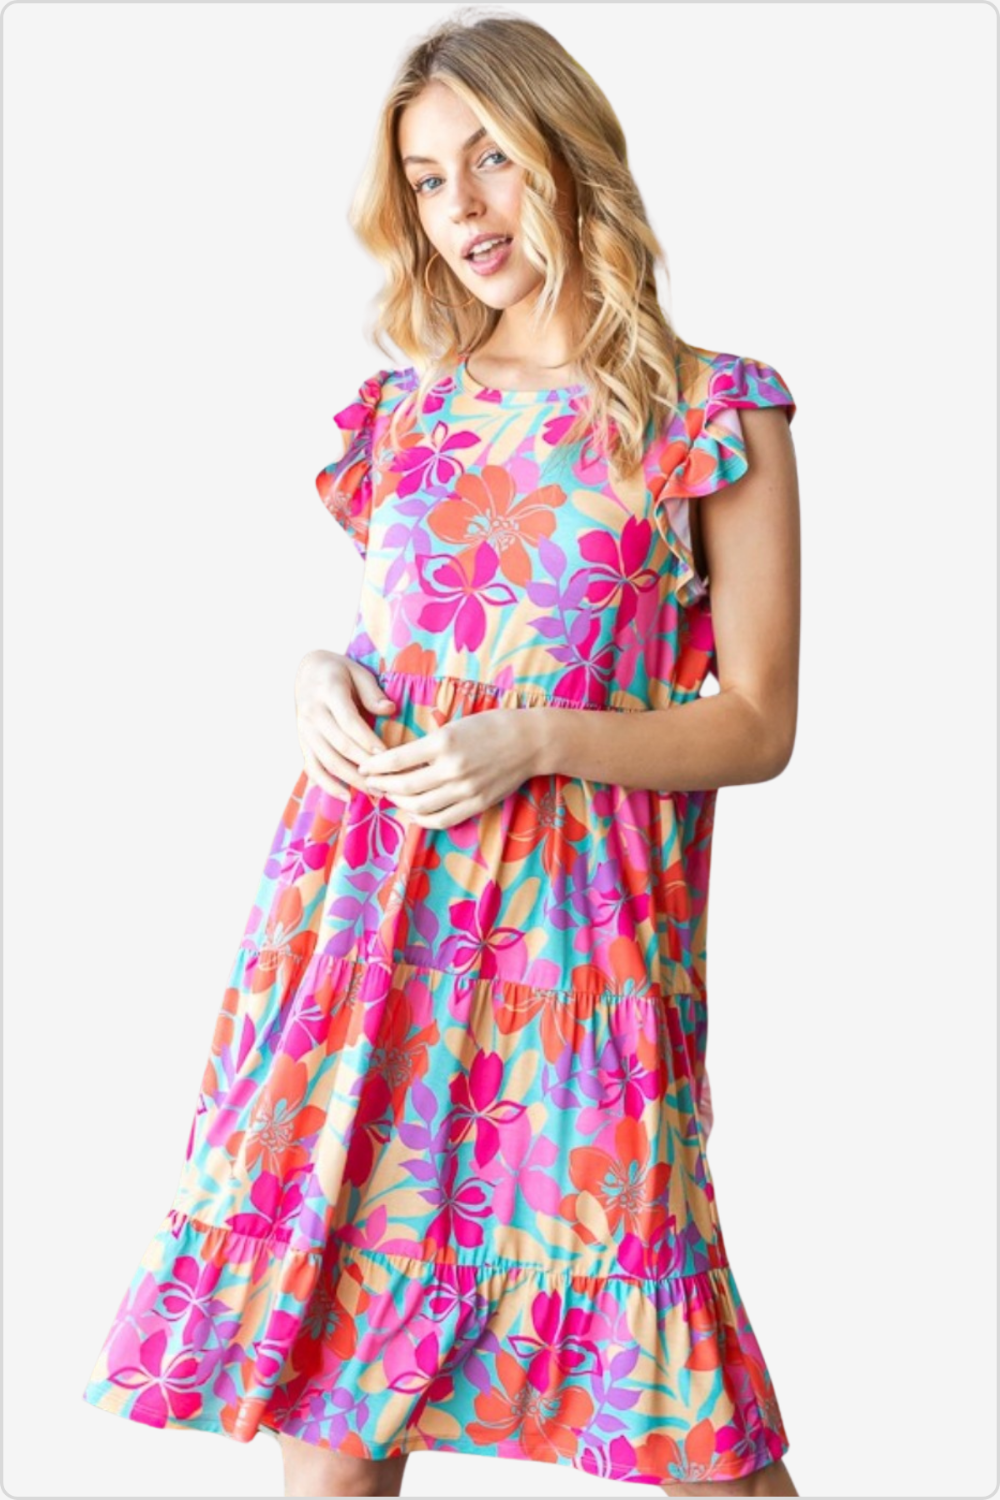 Woman beams in a brightly colored floral ruffle dress, perfect for a playful summer look.